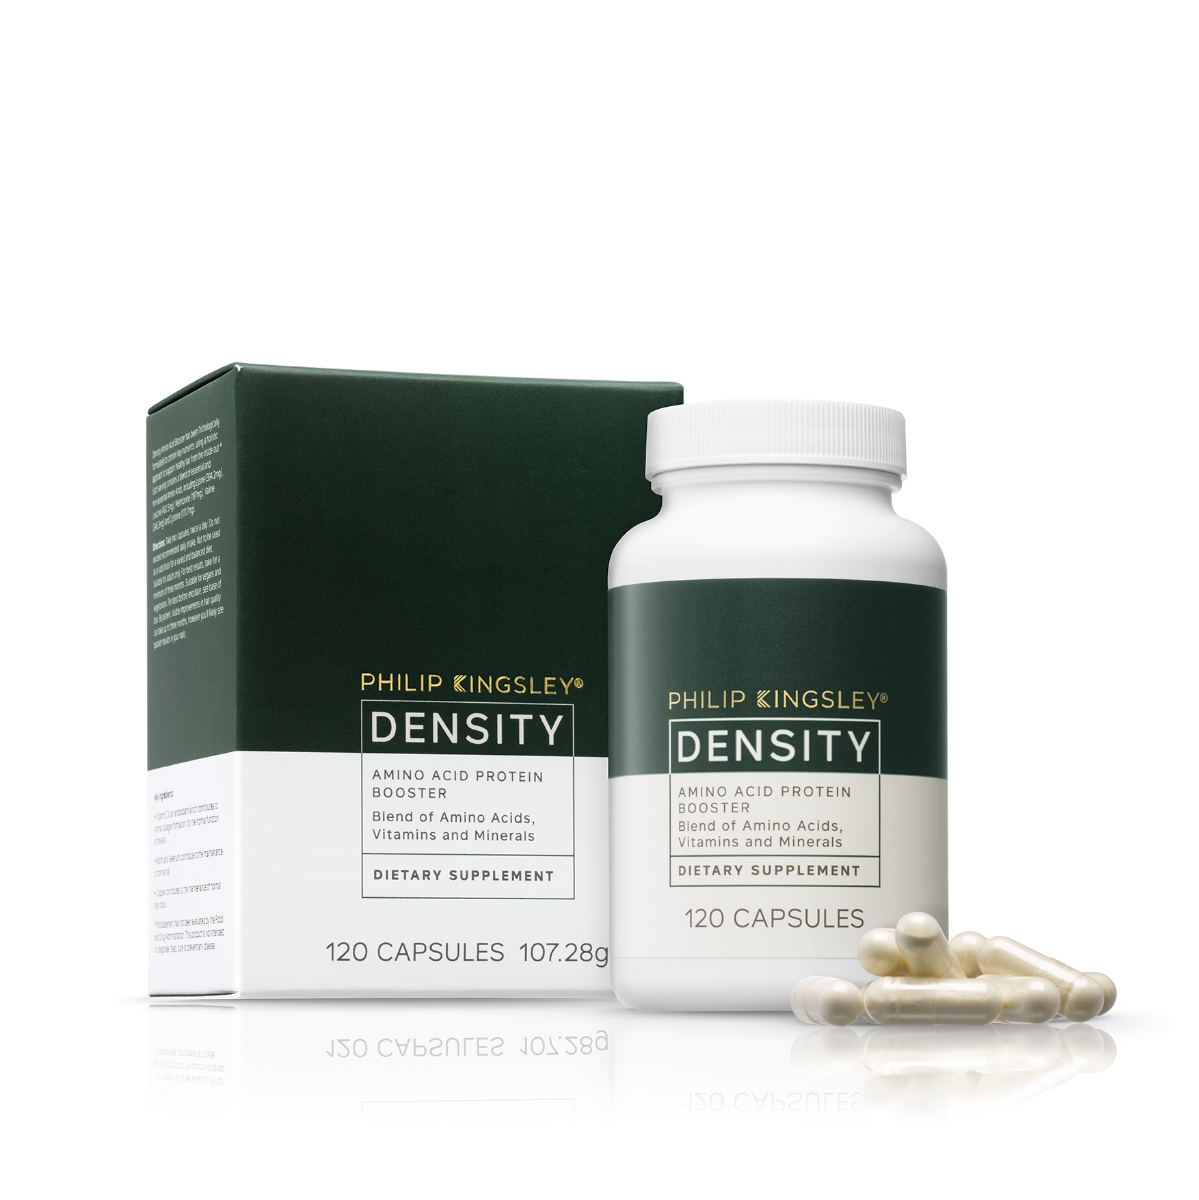 Density Amino Acid Protein Booster Supplement